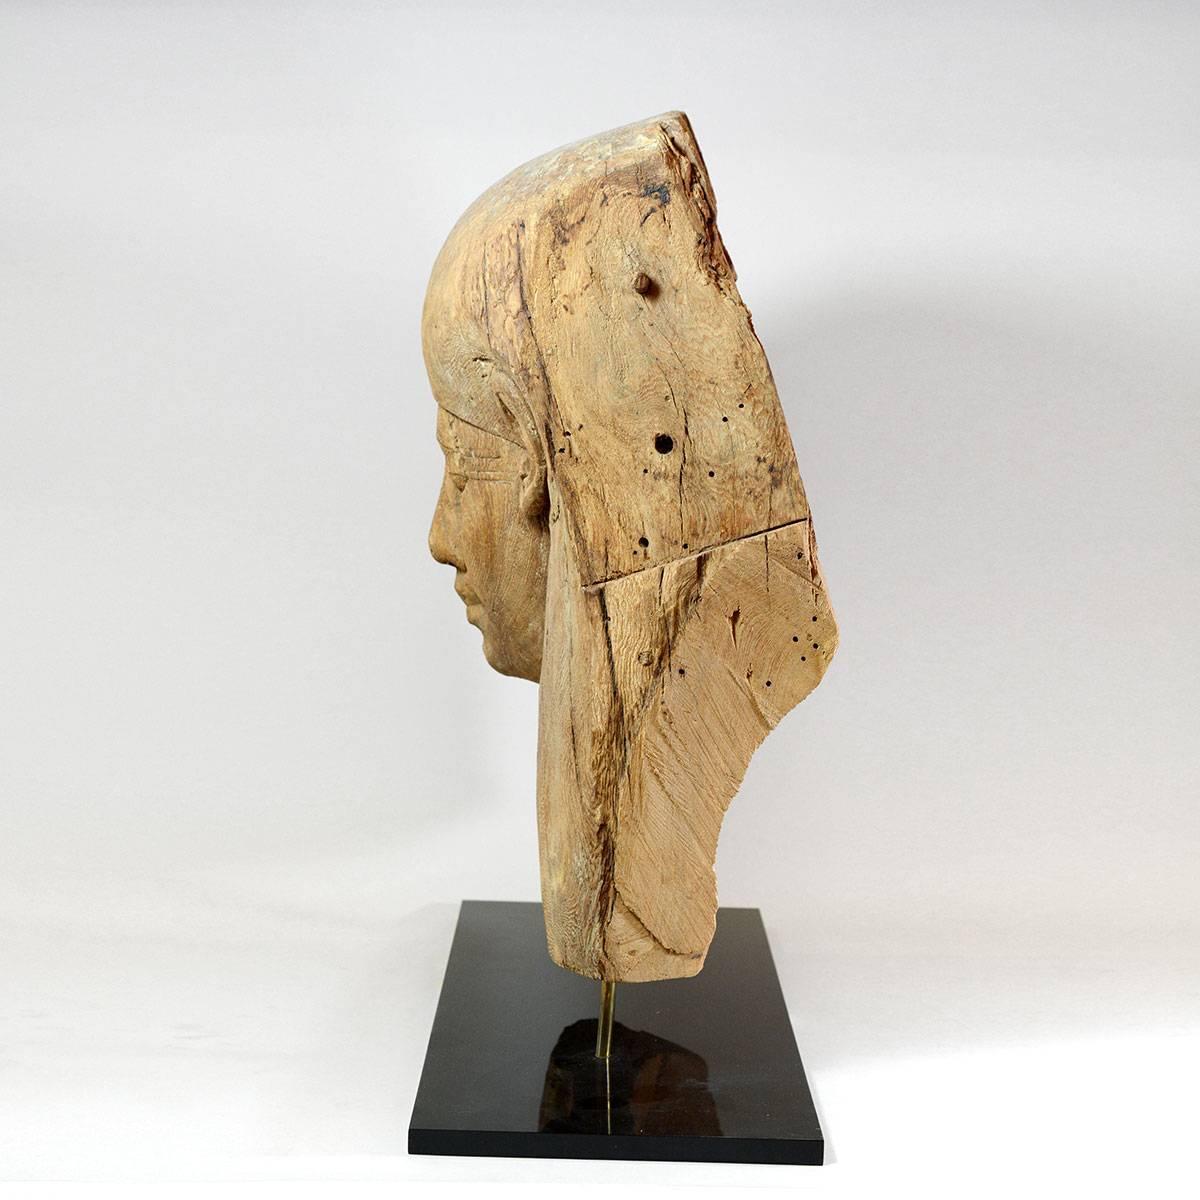 Although Egypt was timber-scarce, her artisans availed themselves of an amply supply of quality hard woods in order to satisfy their creative impulses. The cultural horizons of ancient Egypt’s long history are replete with examples of magnificent